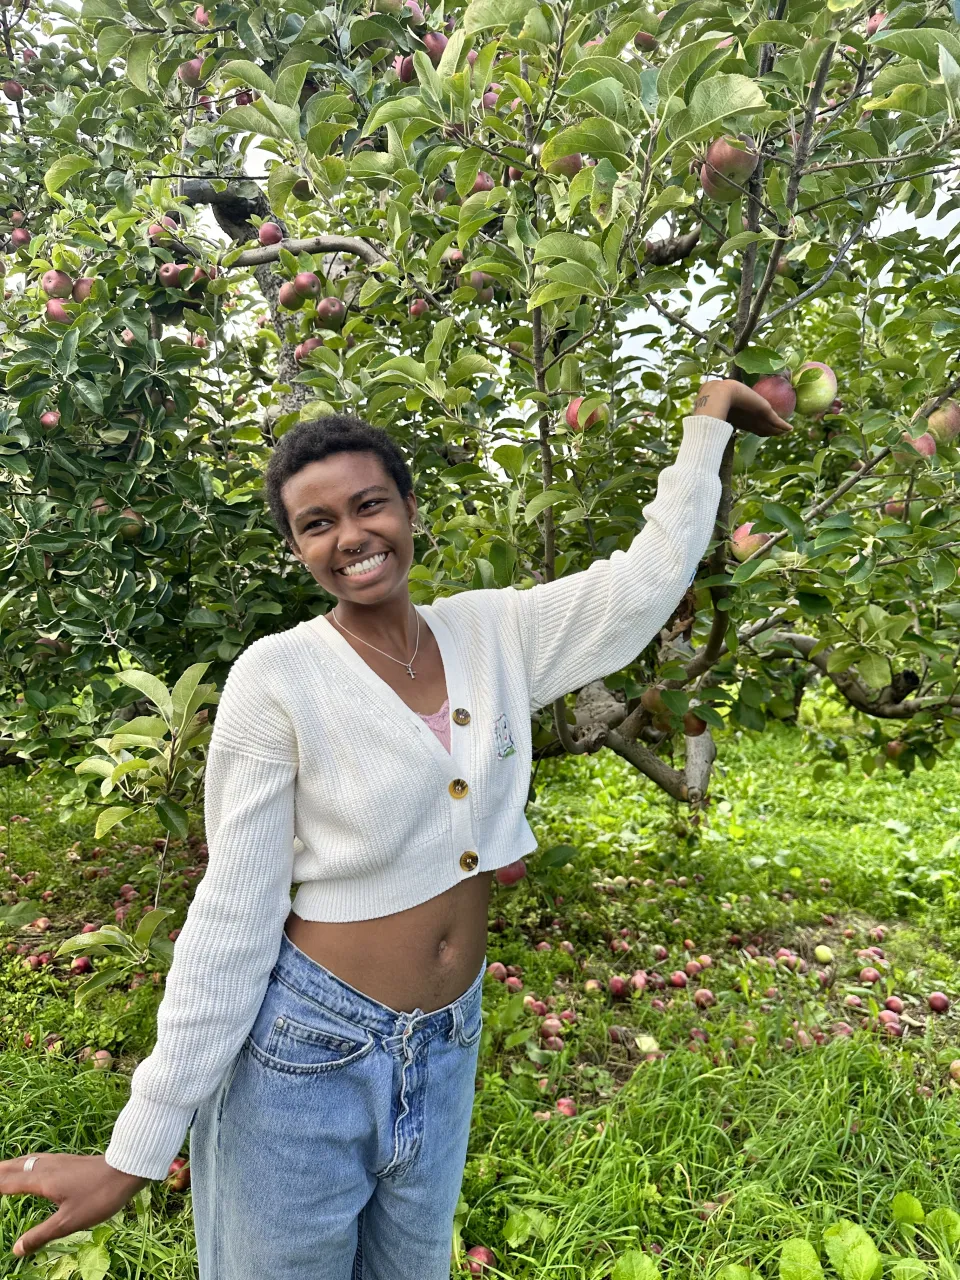 Mack Case '24 reaches for an apple in an orchard, smiling